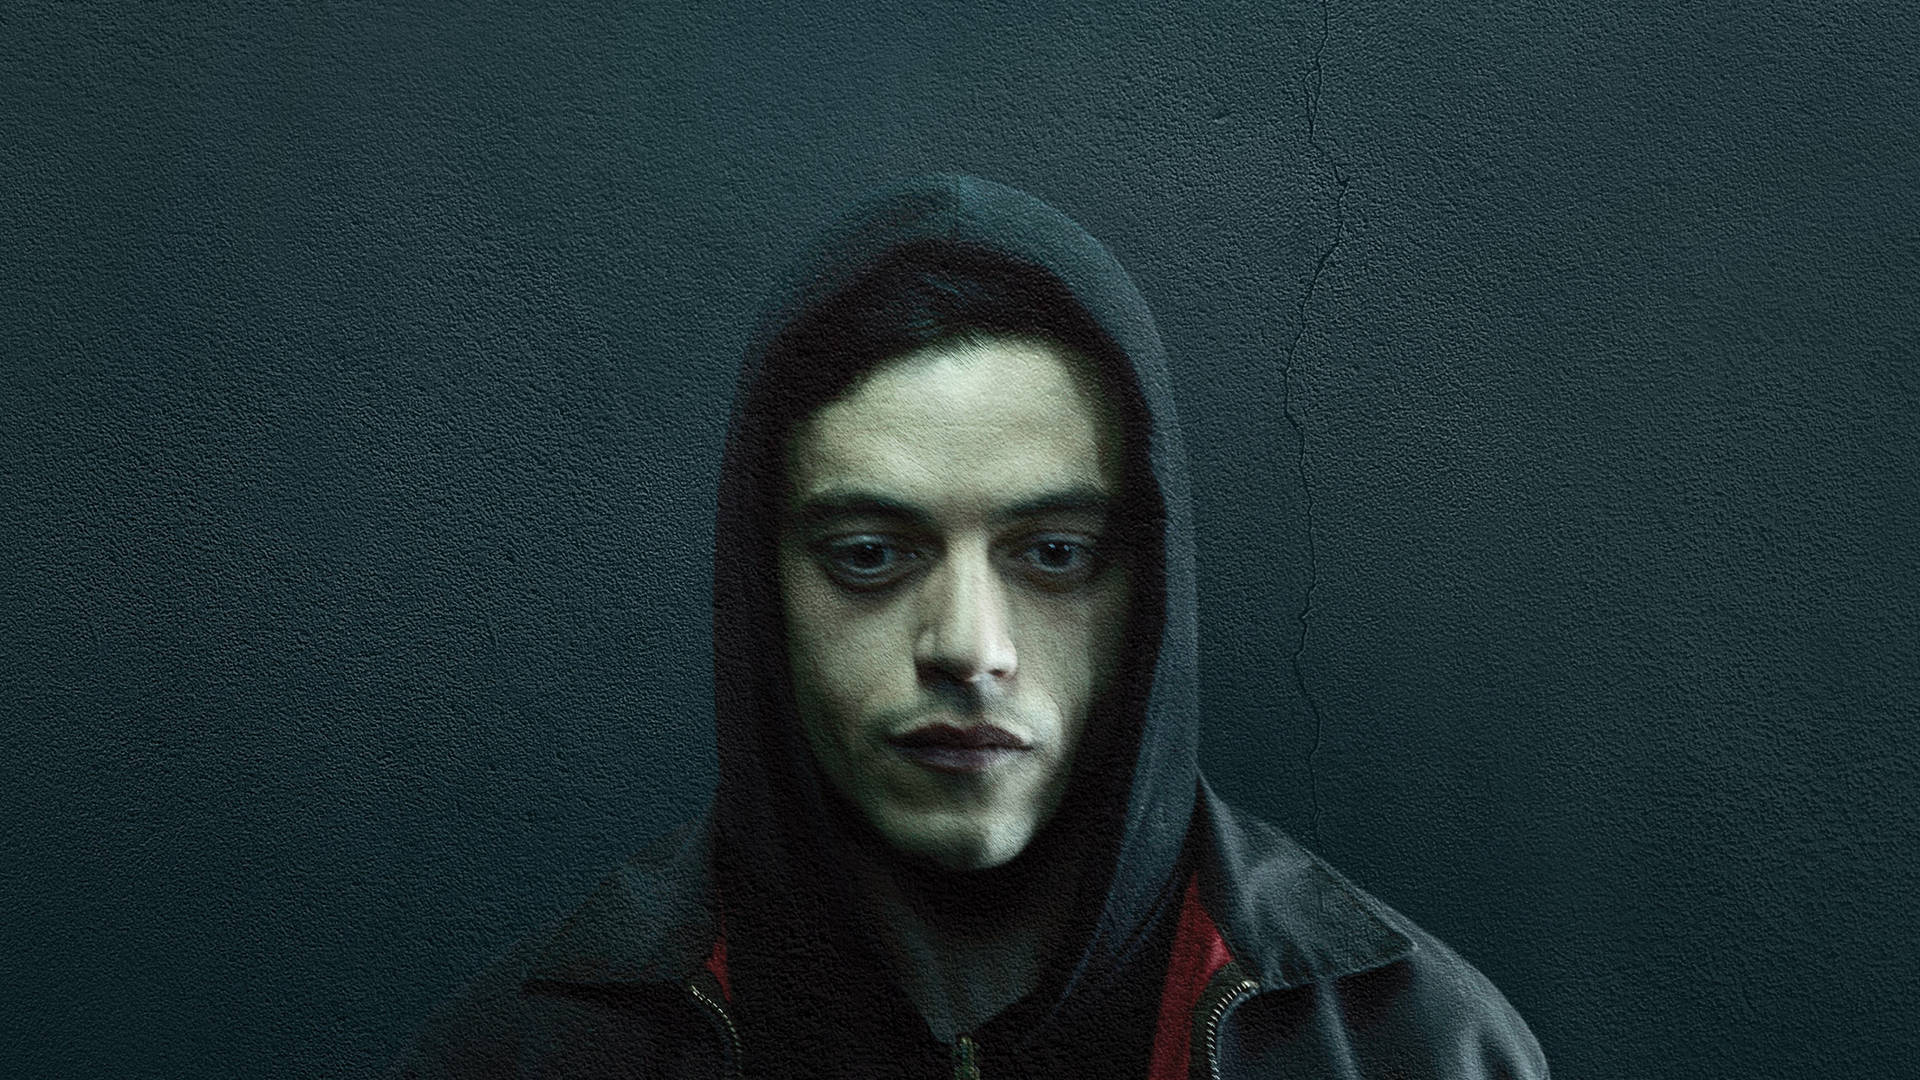 4096X2304 Mr Robot Wallpaper and Background